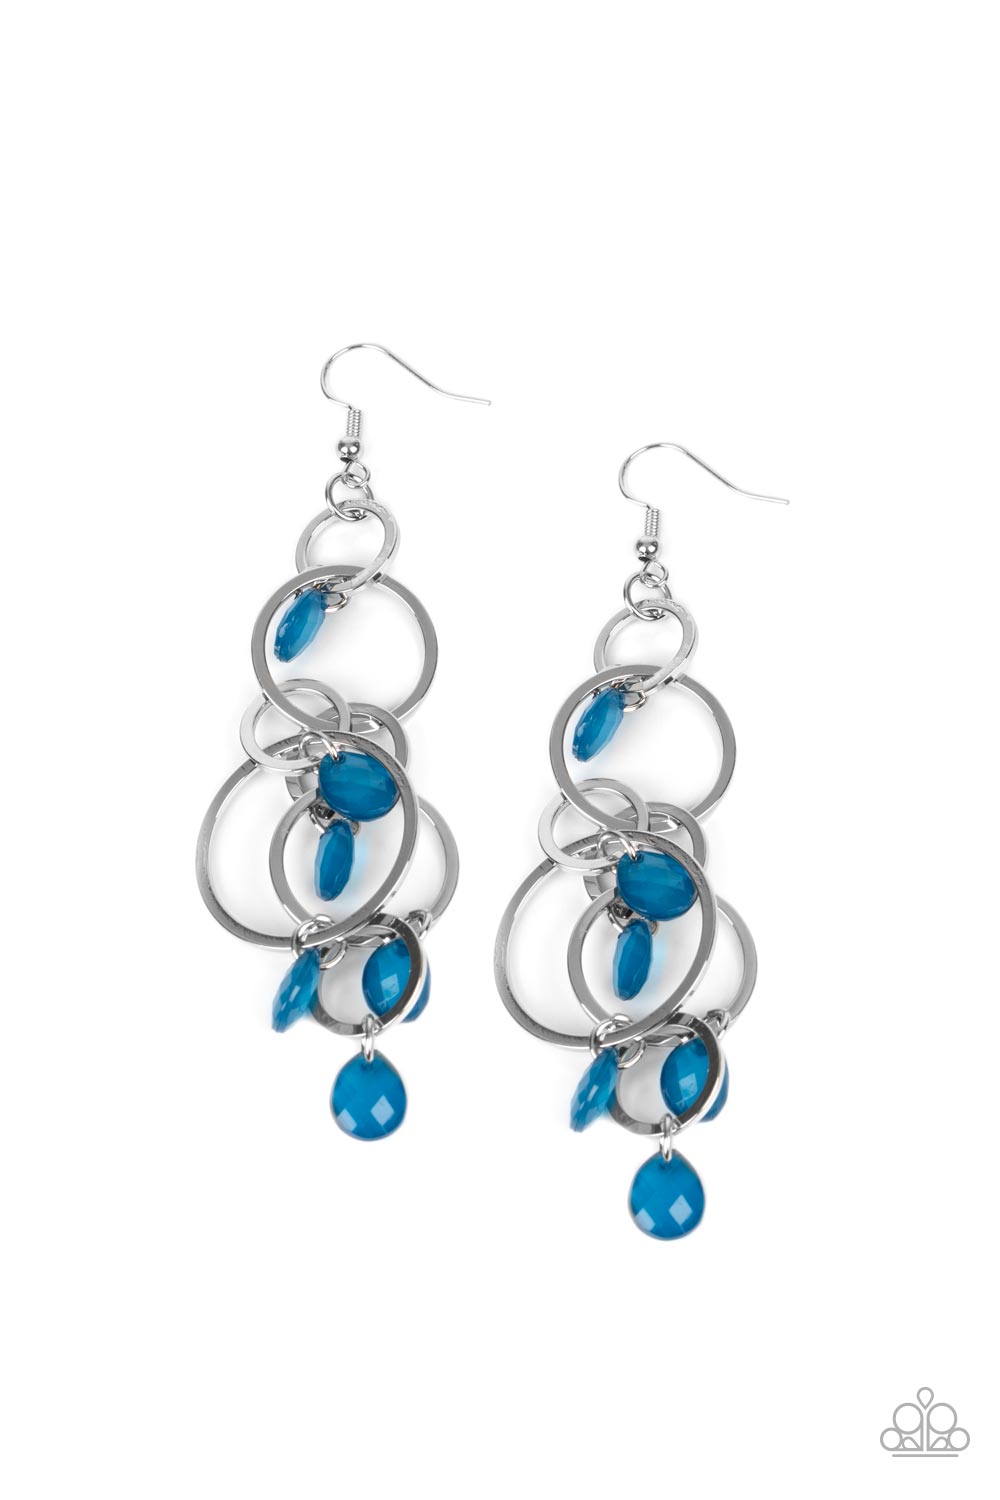 Dizzyingly Dreamy - Blue Item #P5WH-BLXX-245XX Opaque Mykonos Blue teardrops sporadically cascade from an assortment of mismatched silver links, resulting in a whimsically tasseled chandelier. Earring attaches to a standard fishhook fitting.  Sold as one pair of earrings.